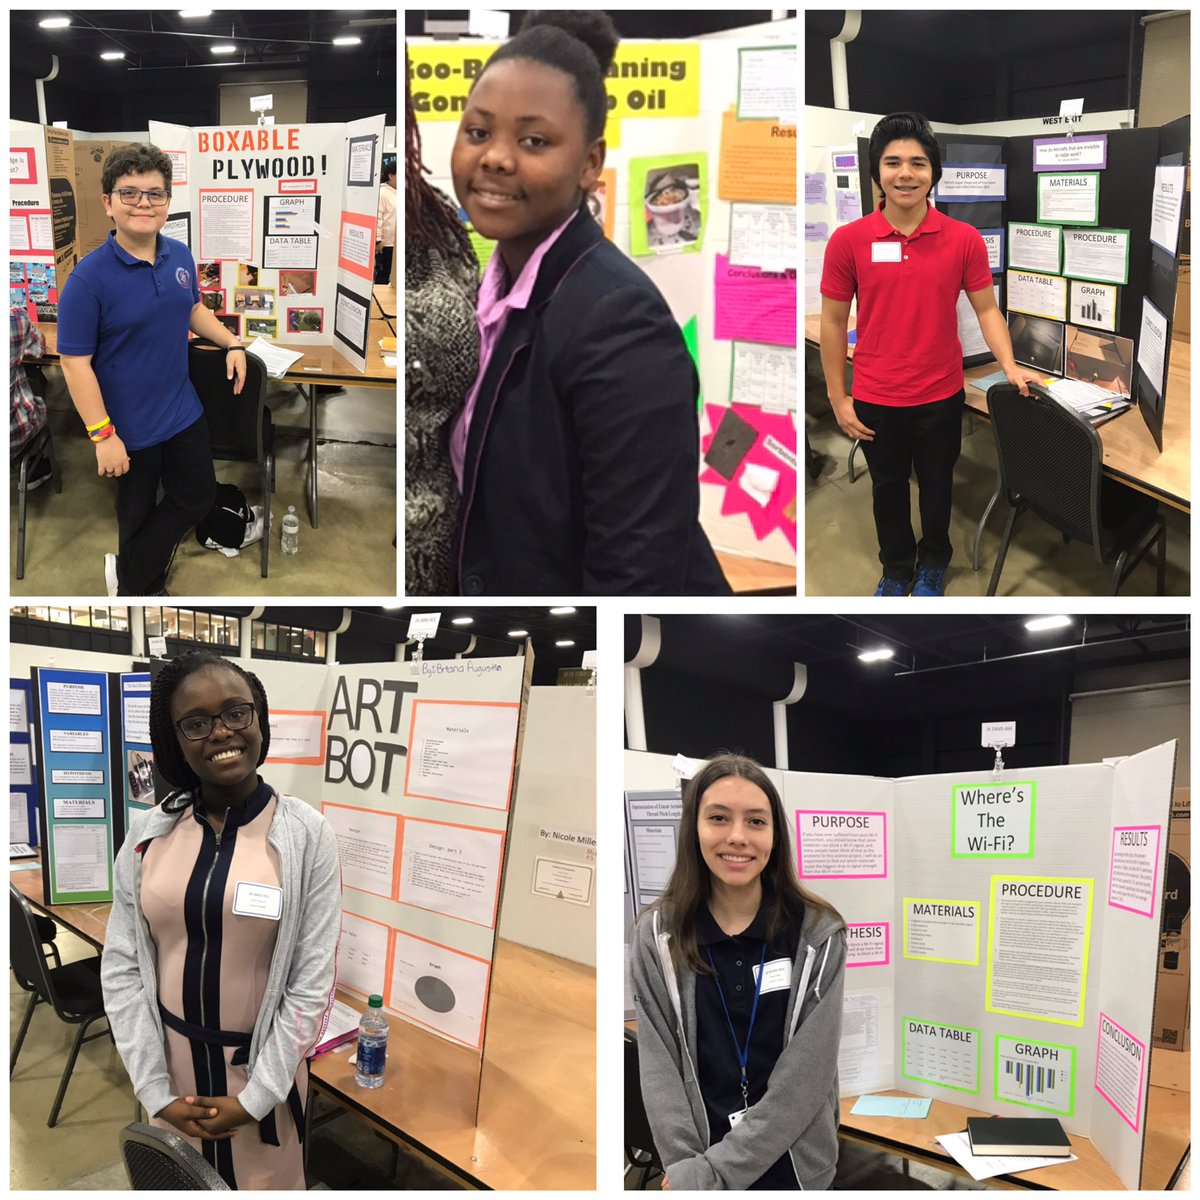 @CongressMS junior scientists here @SoFlaFair for regional science and engineering fair with @PBCSDScience and @JZ_Science @LEAD4ALL #STEMeducation #scientificmethod